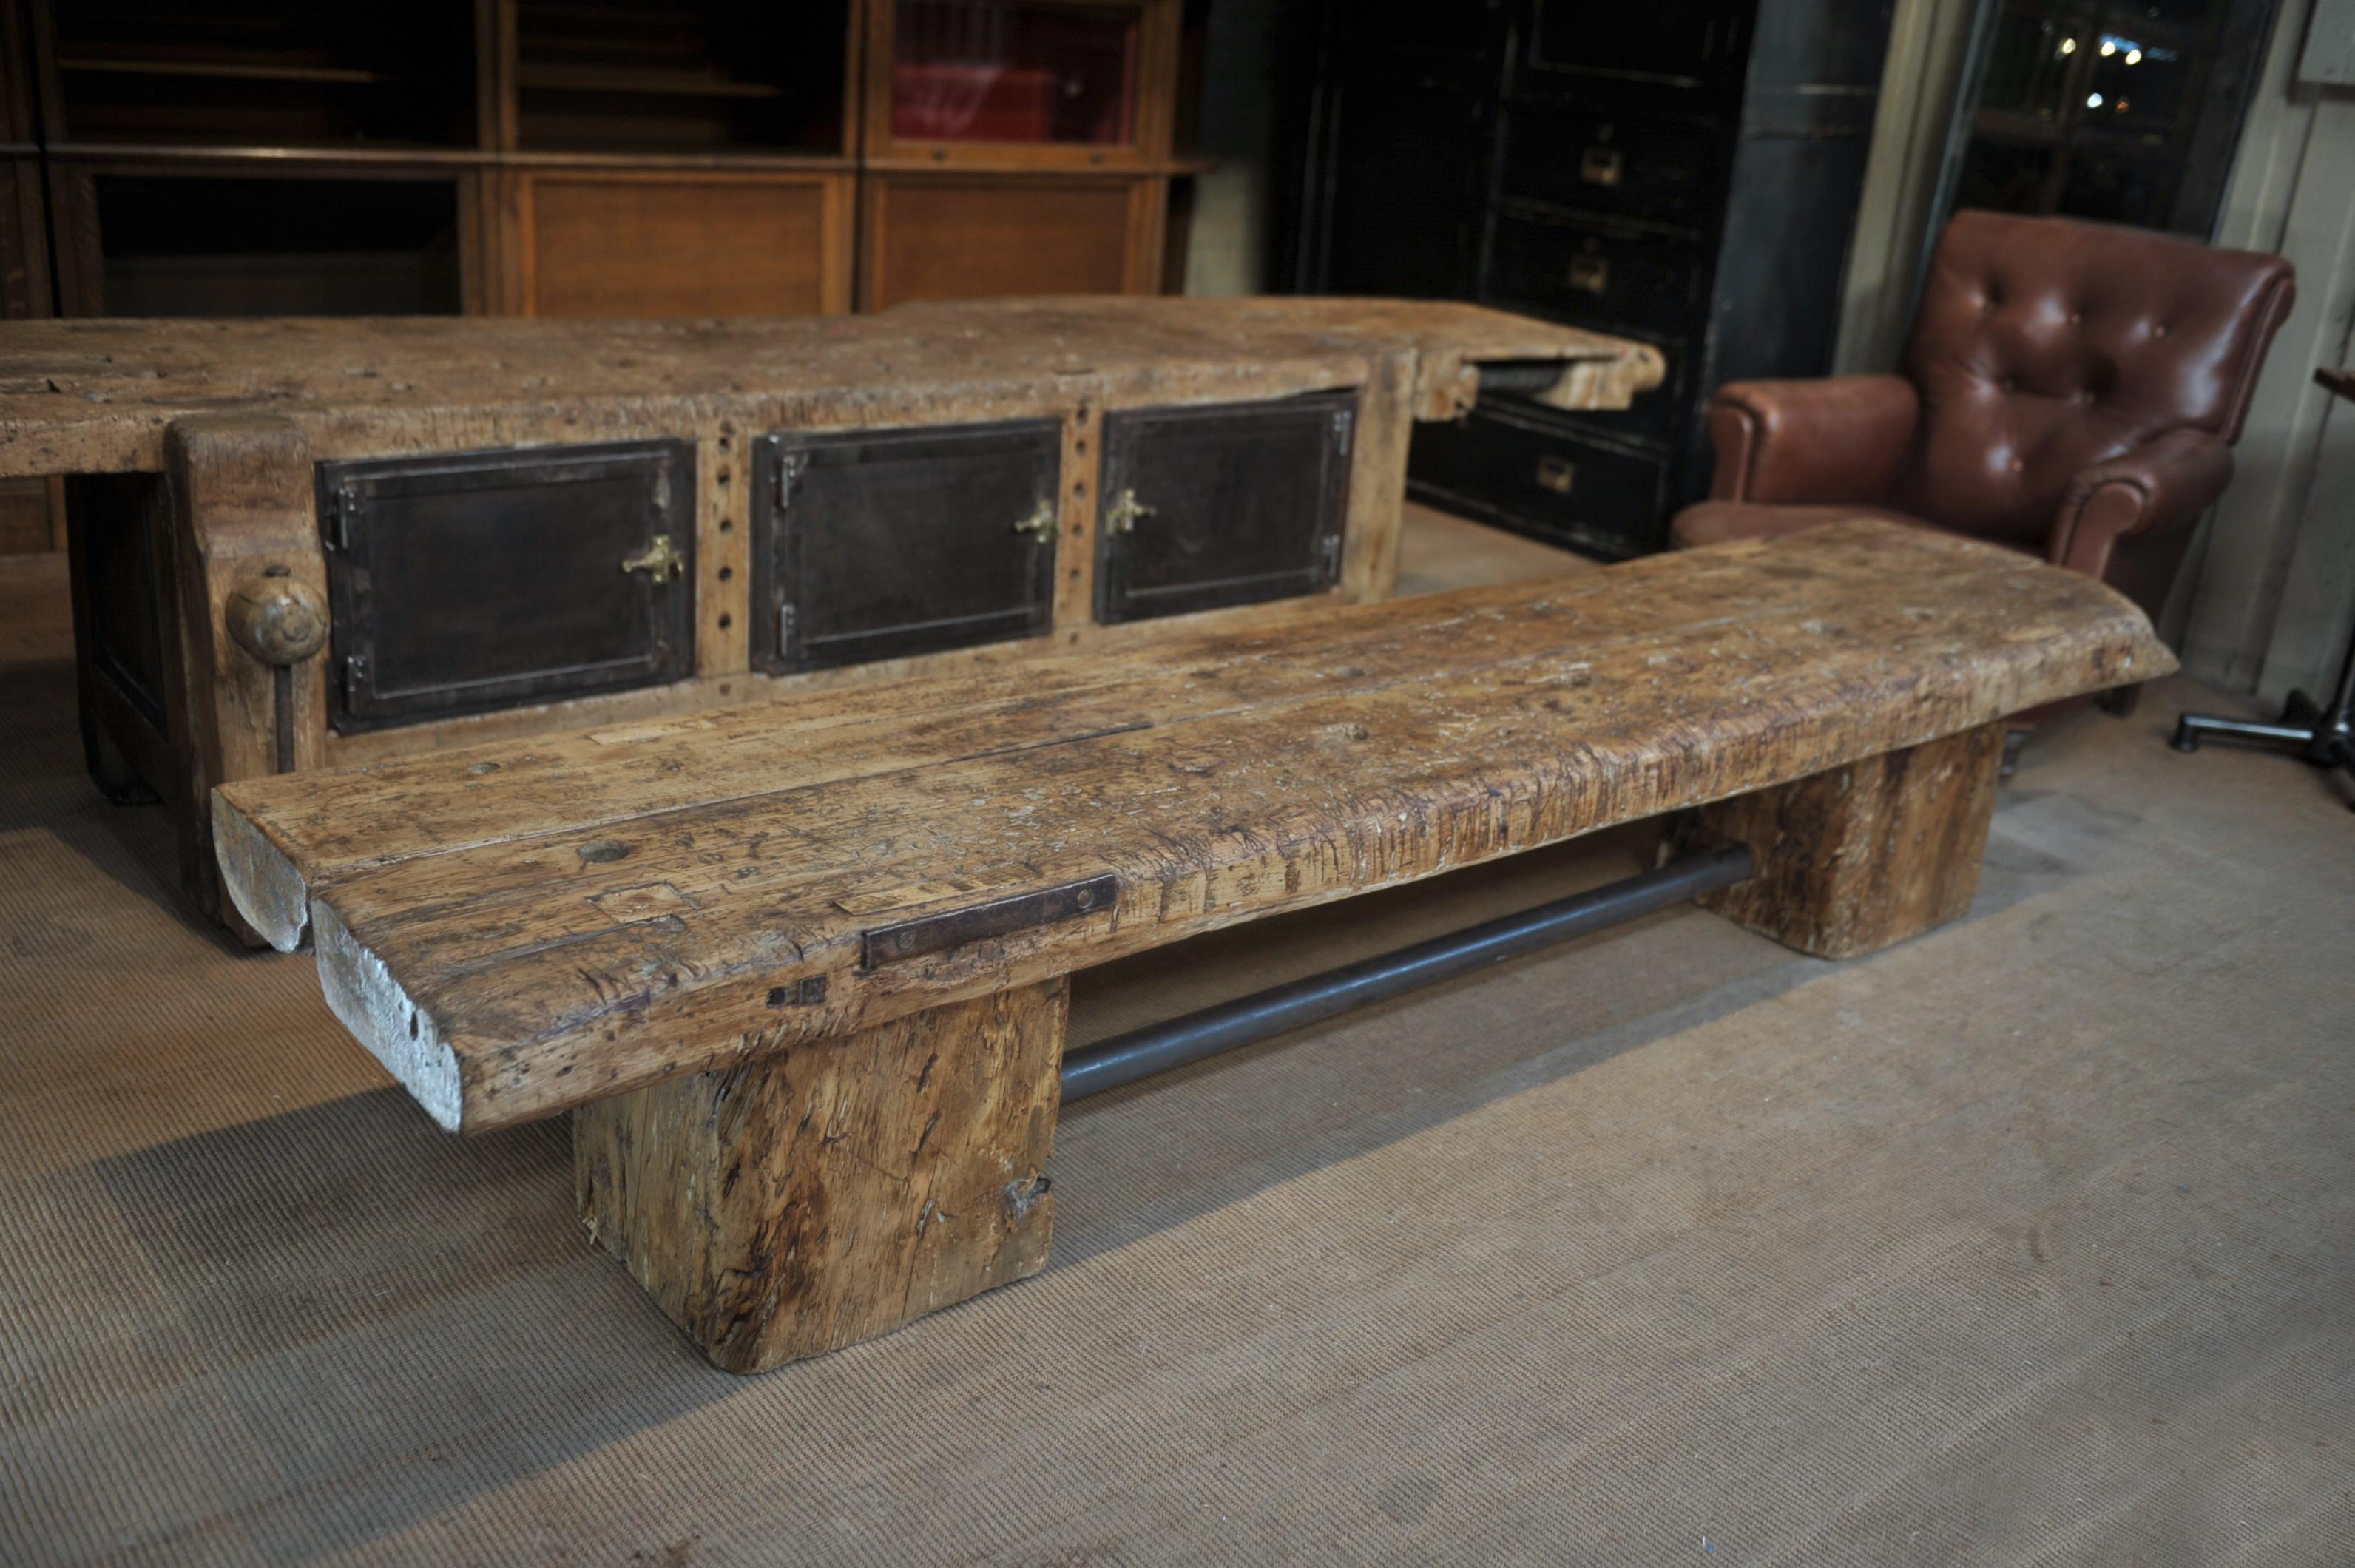 Mid-20th Century French Long Coffee Table or Bench in Pine and Iron Wood circa 1930 with Iron For Sale